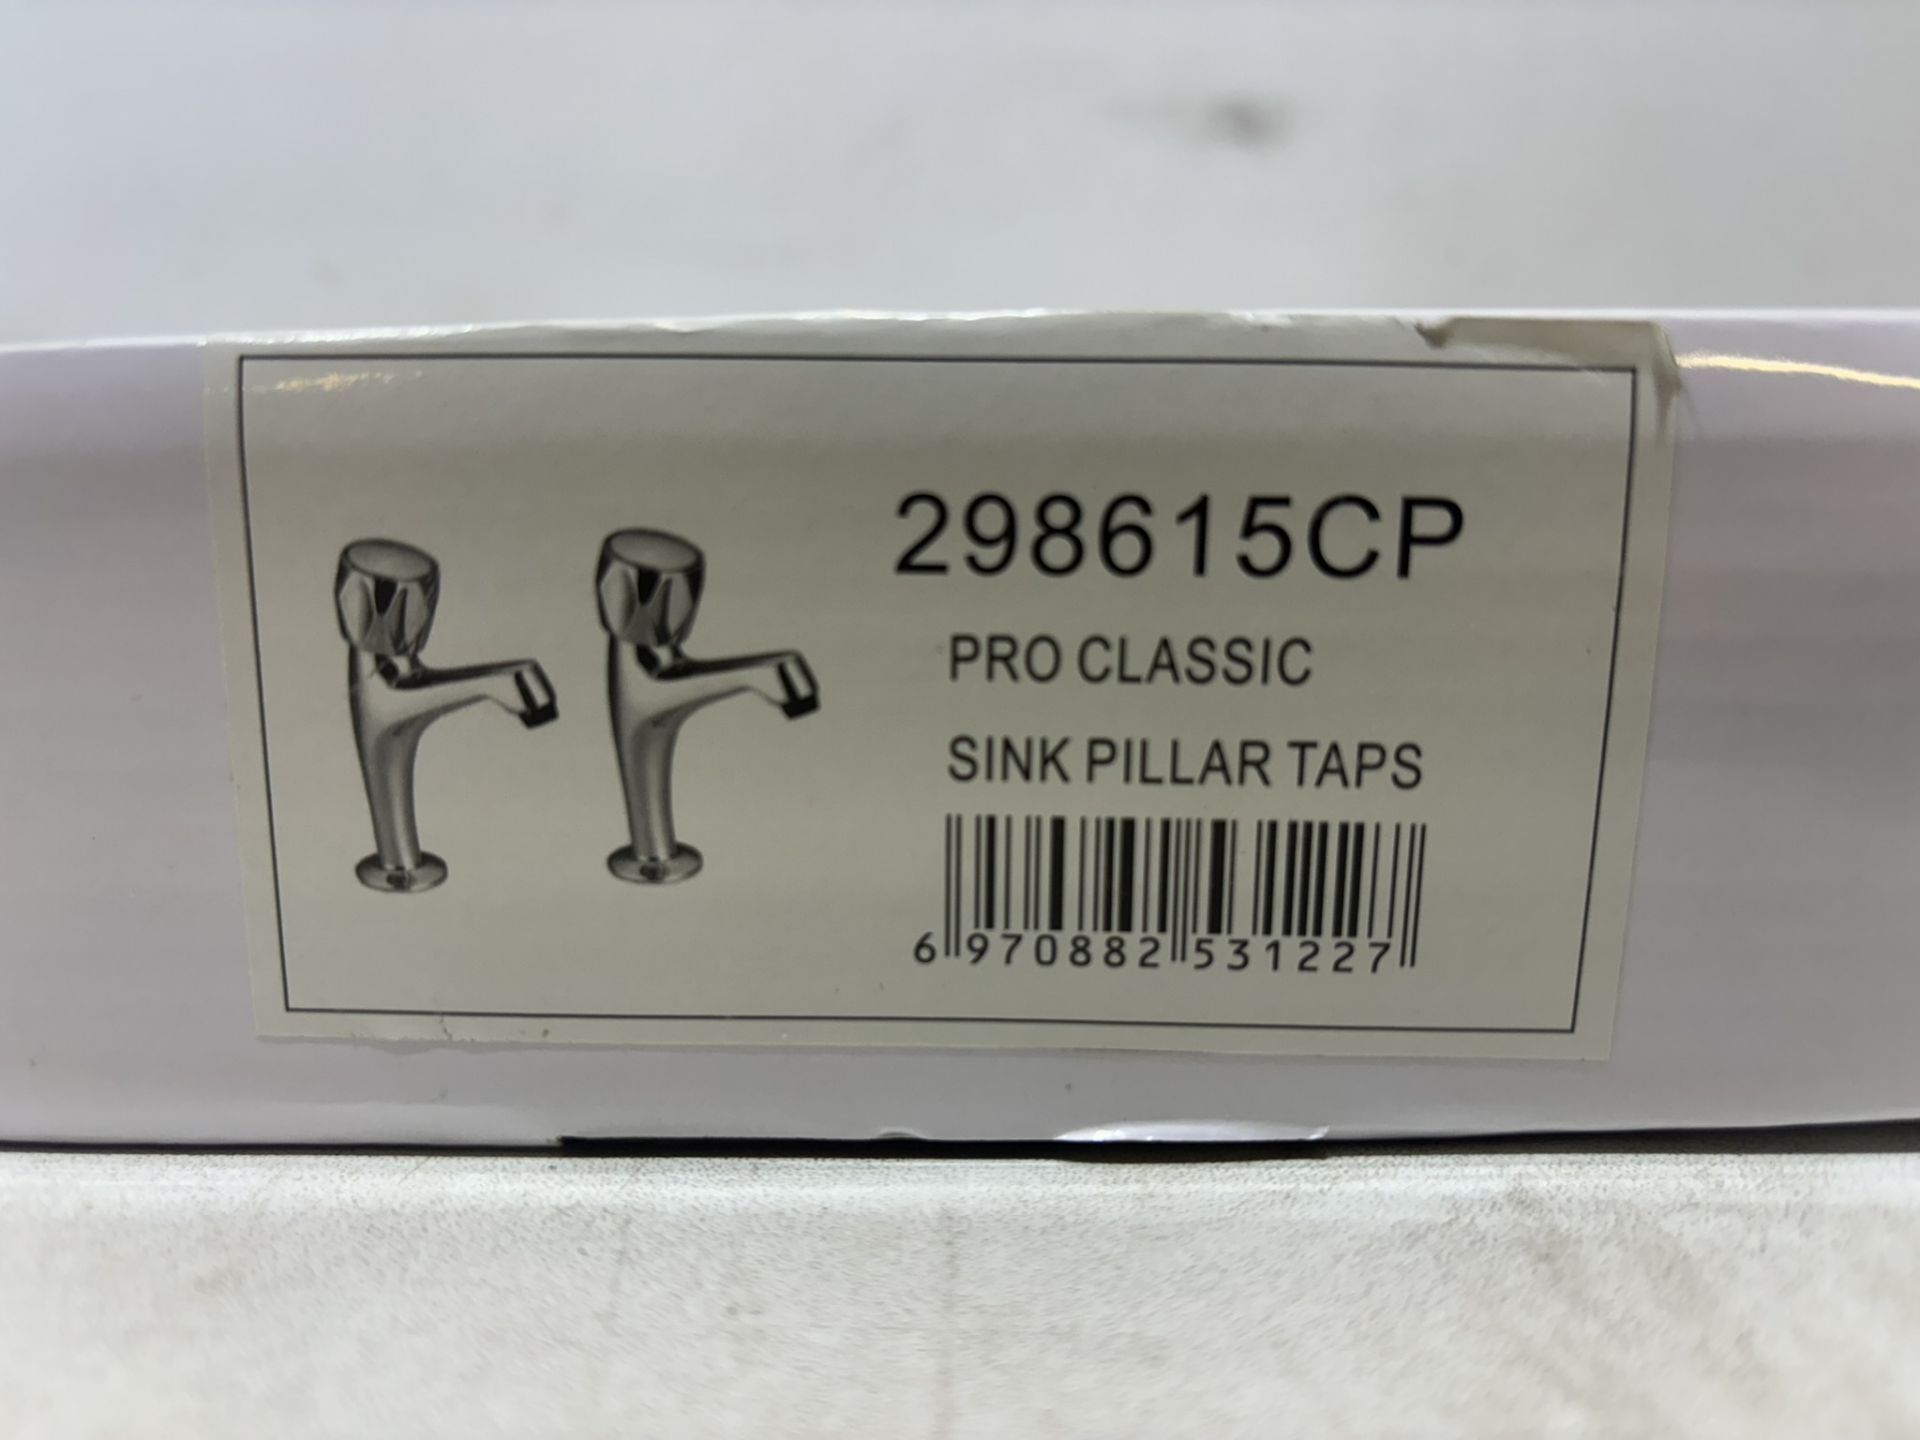 5 x Pro Tap Classic Kitchen Sink Pillar Taps 298615CP - Chrome Plated - Image 2 of 4